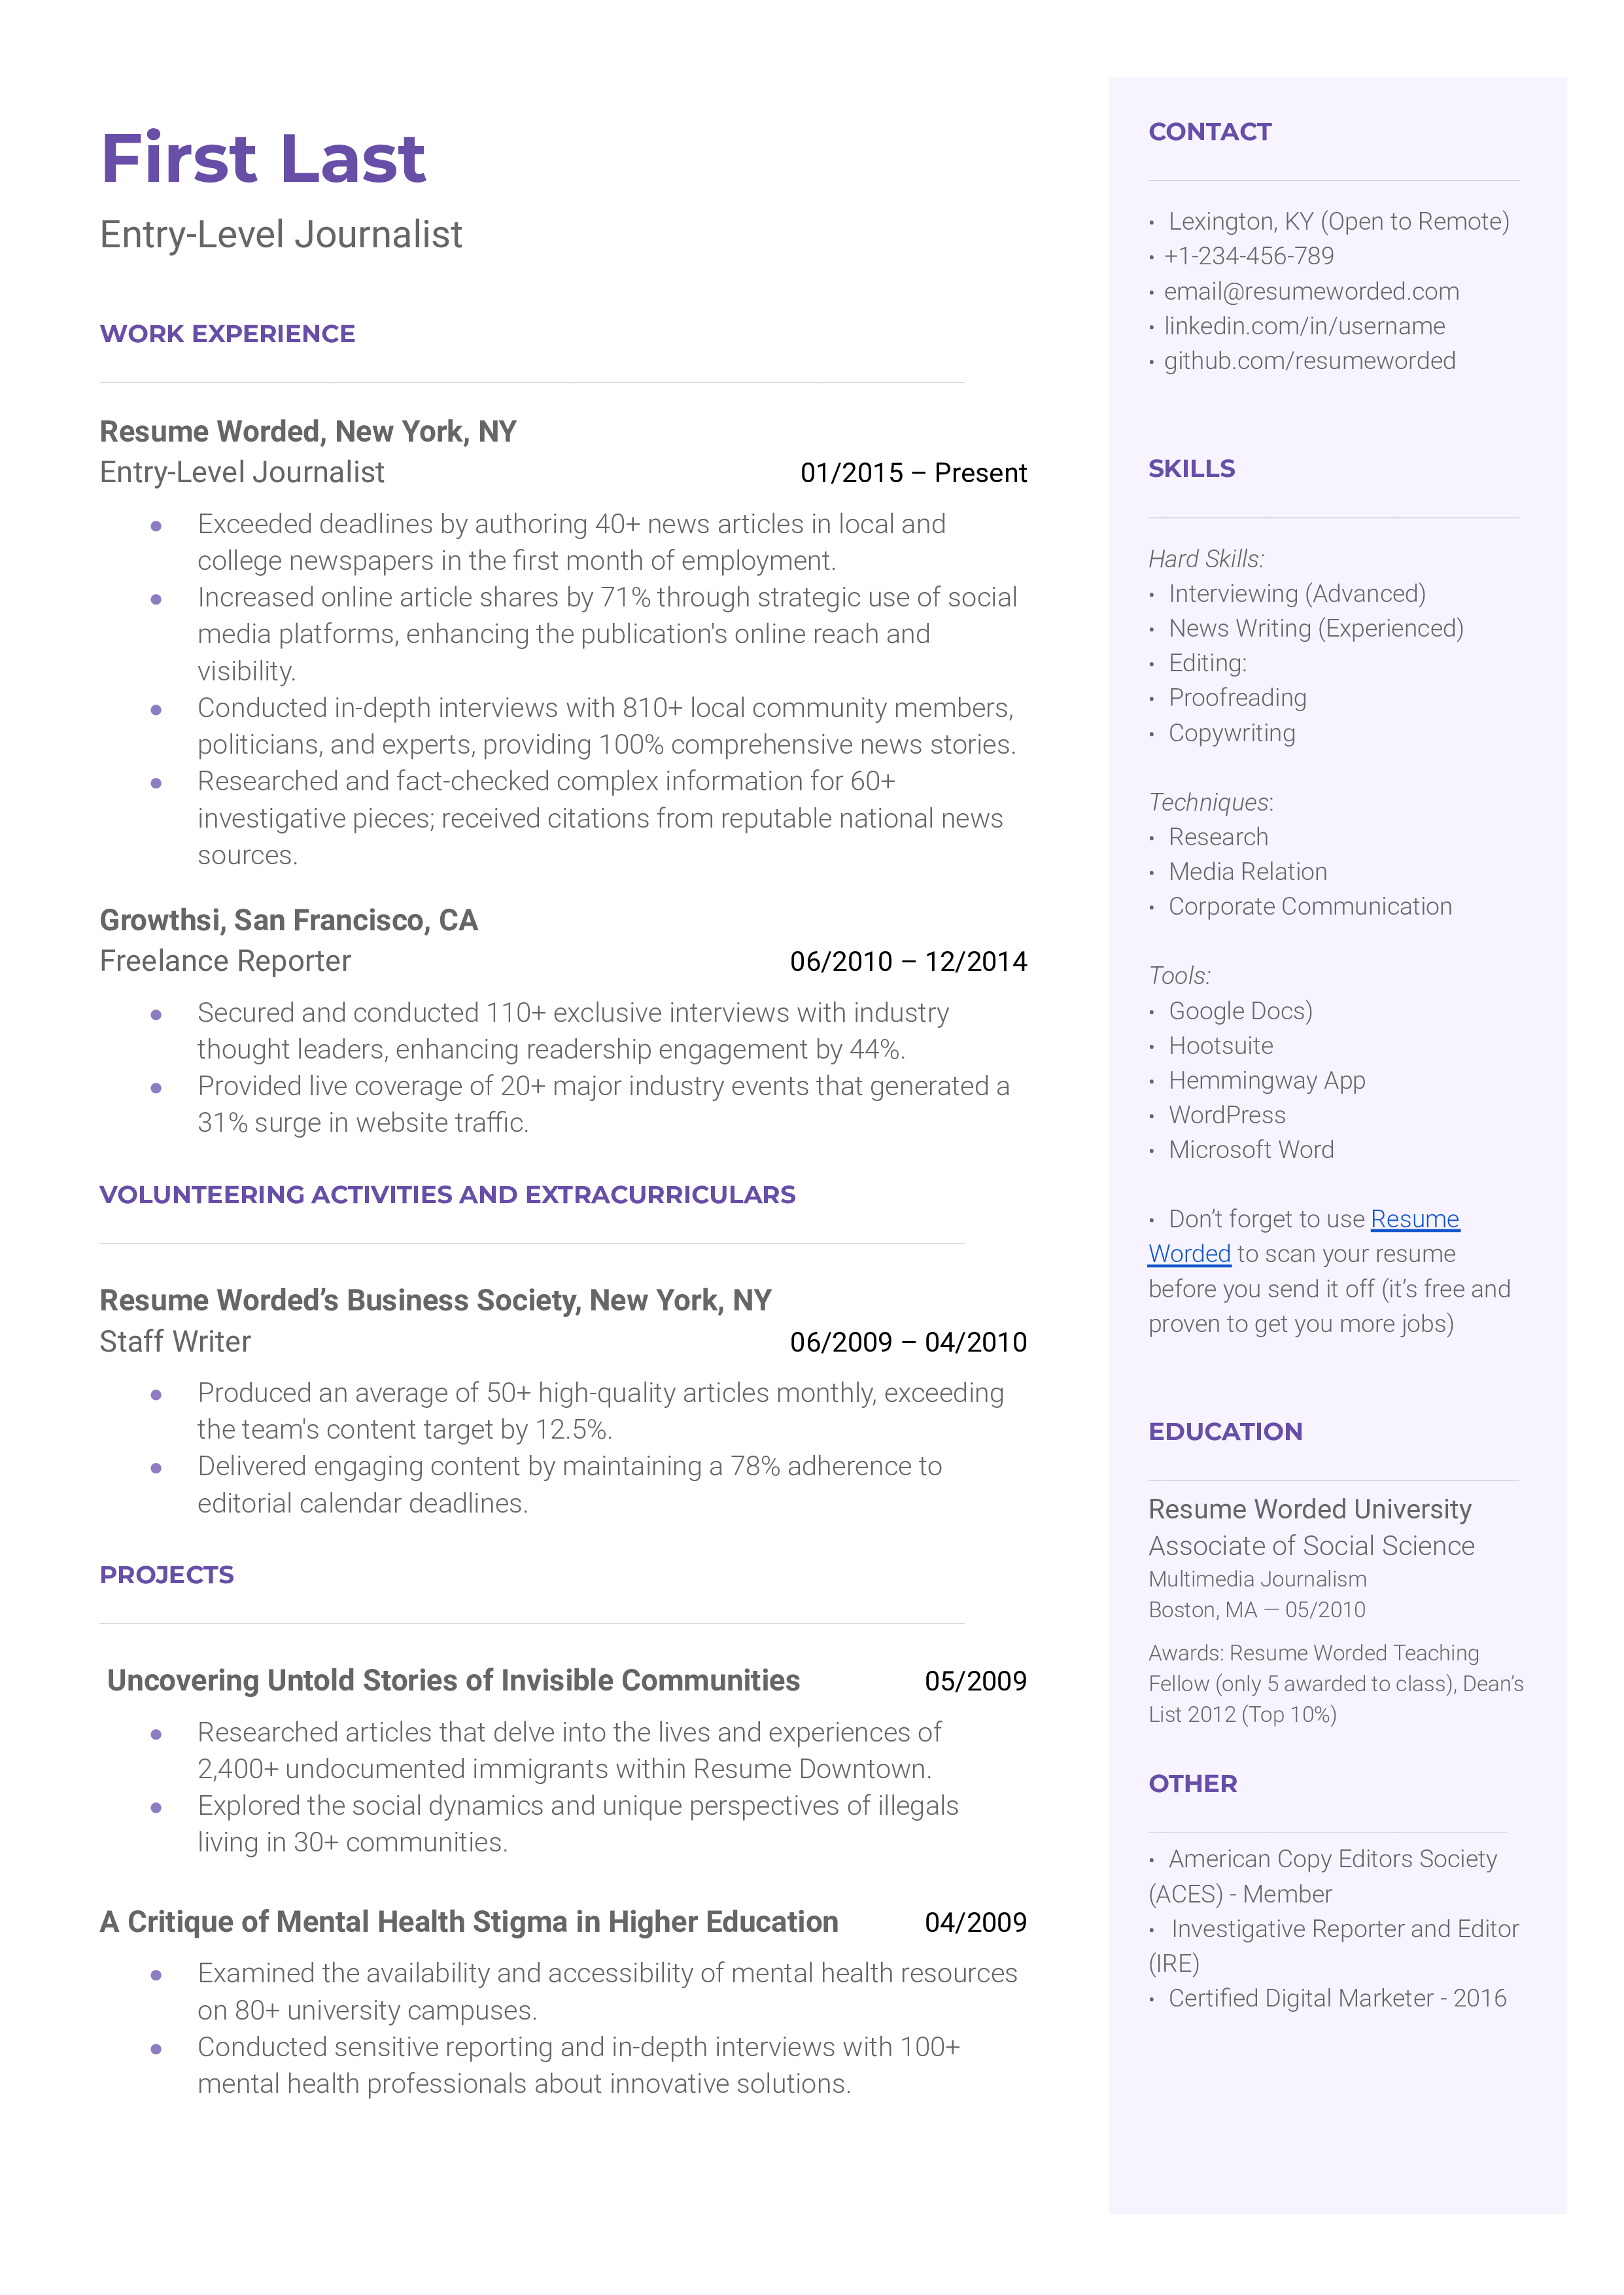 Entry-level journalist resume featuring relevant coursework and digital skills.